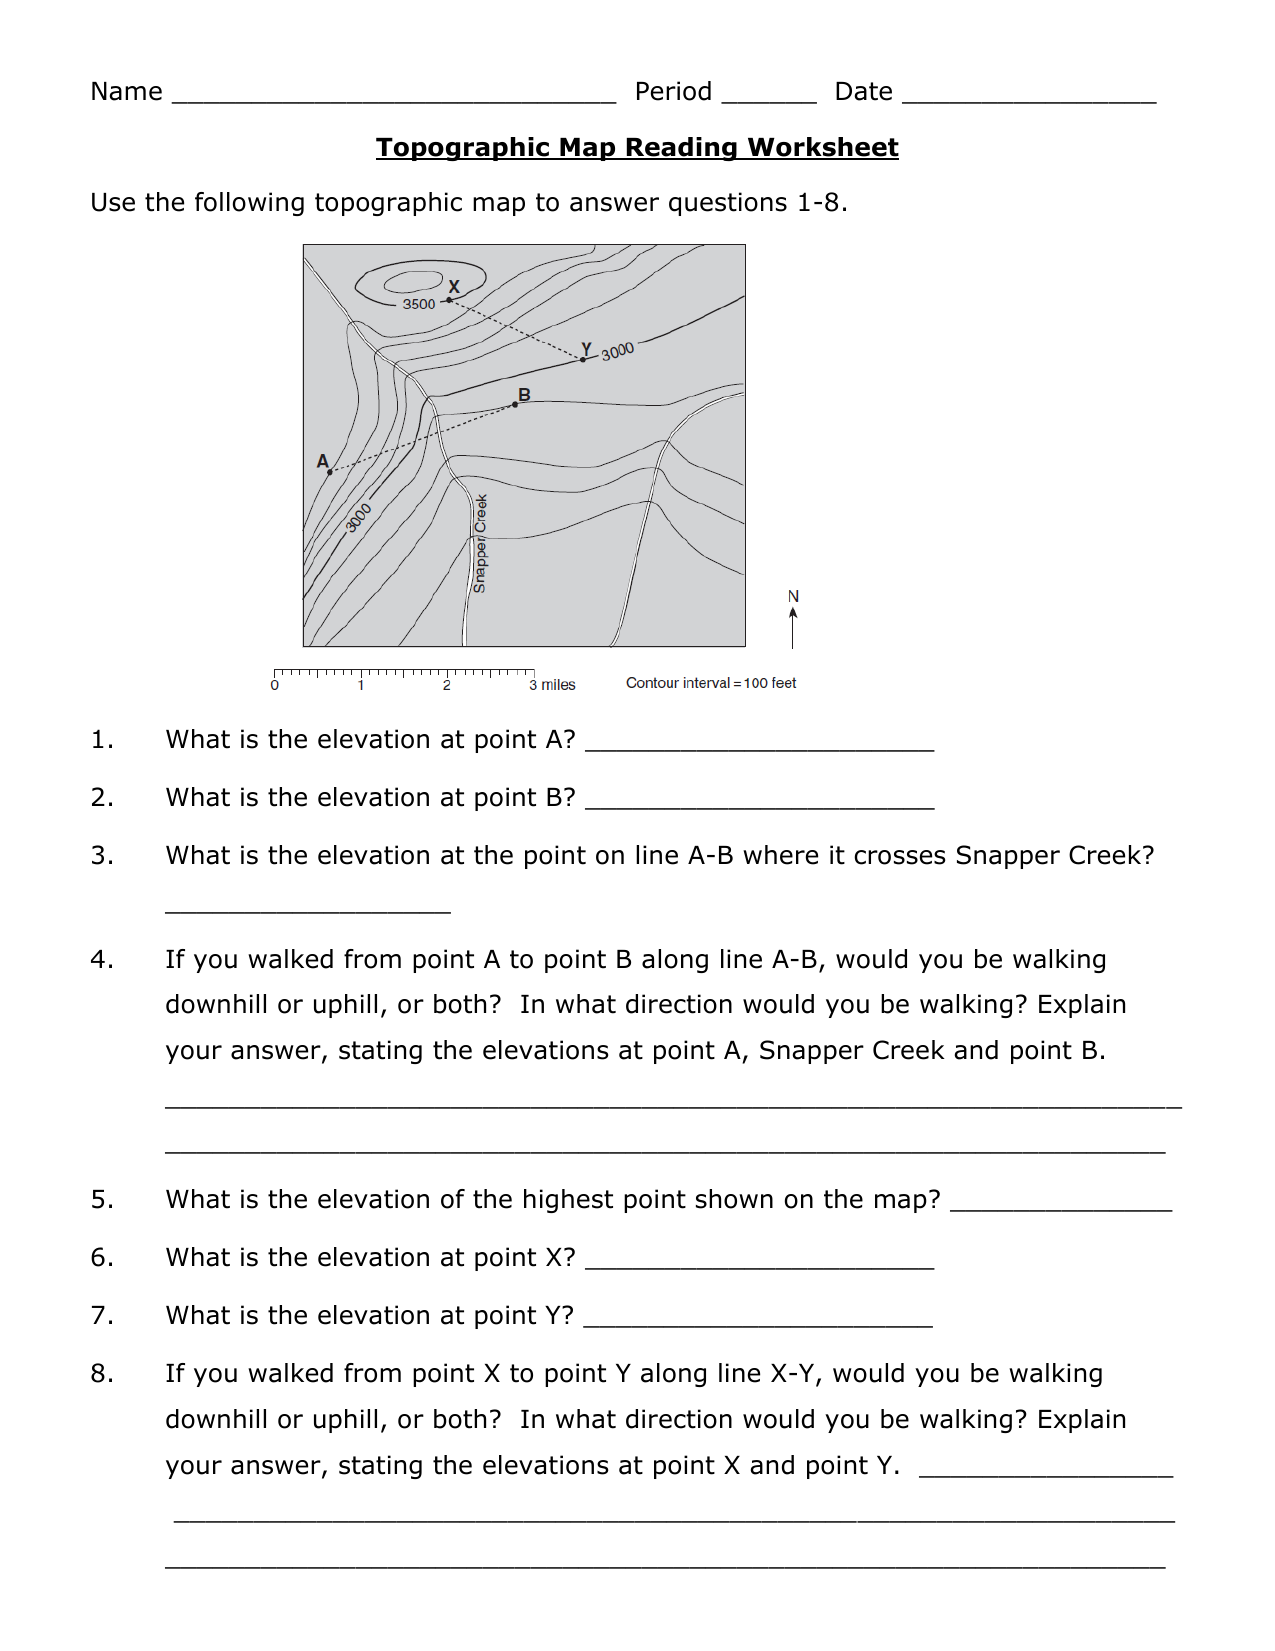 Topographic Map Reading Worksheet With Regard To Topographic Map Reading Worksheet Answers